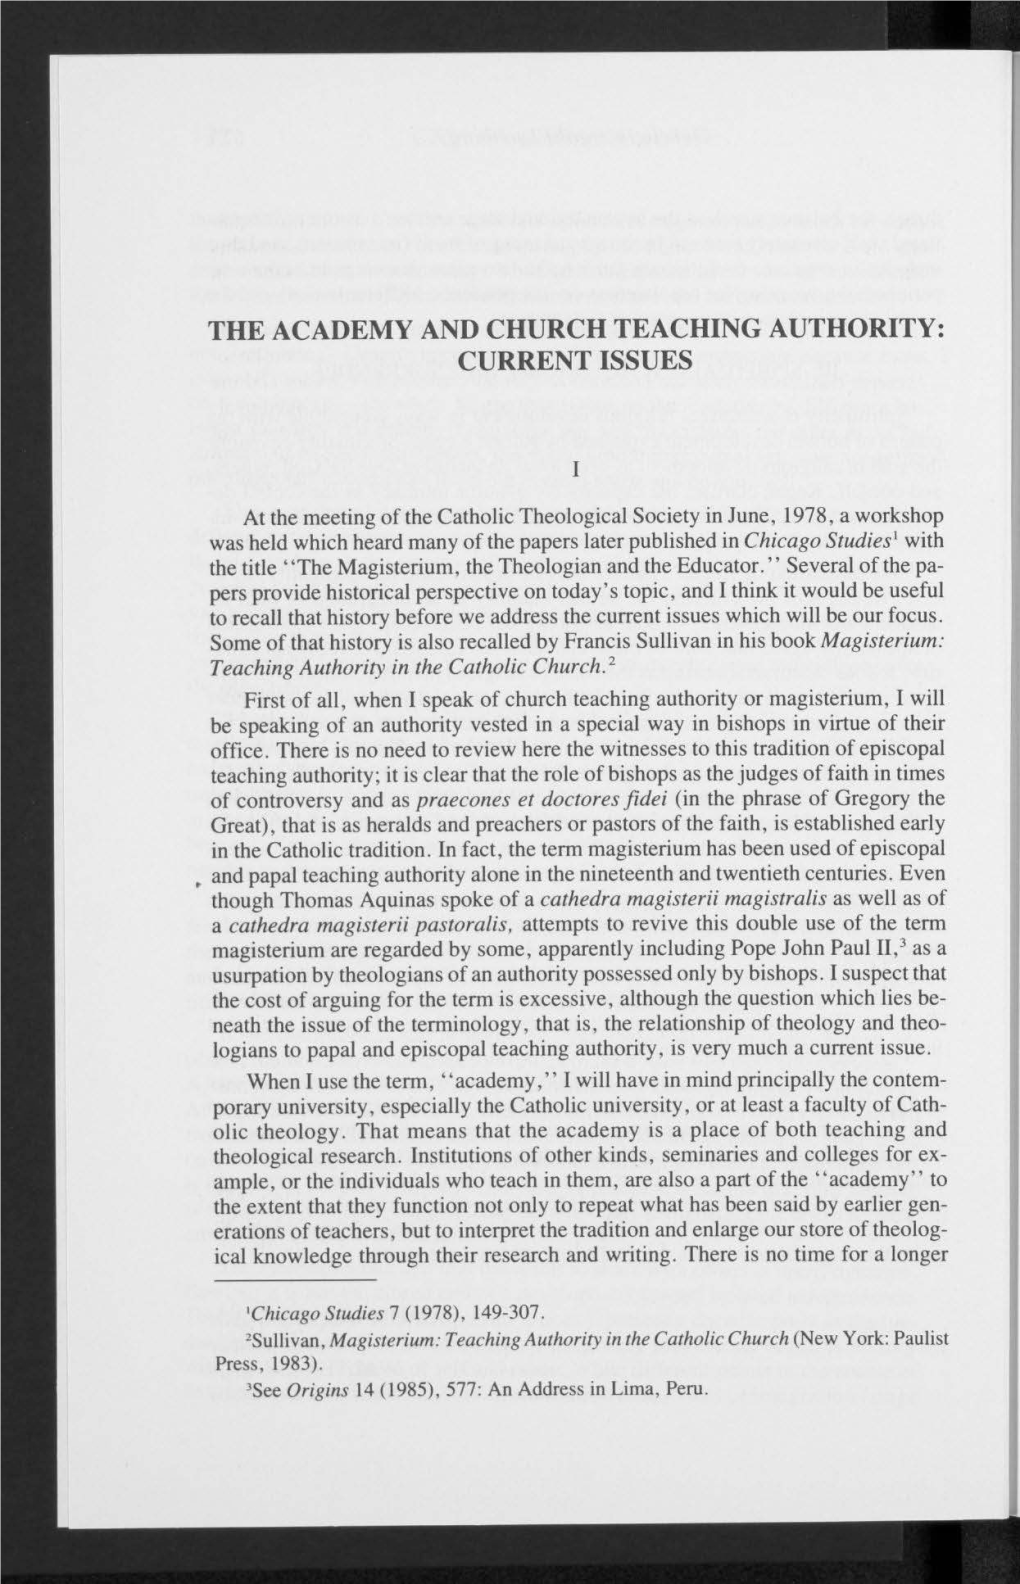 The Academy and Church Teaching Authority: Current Issues